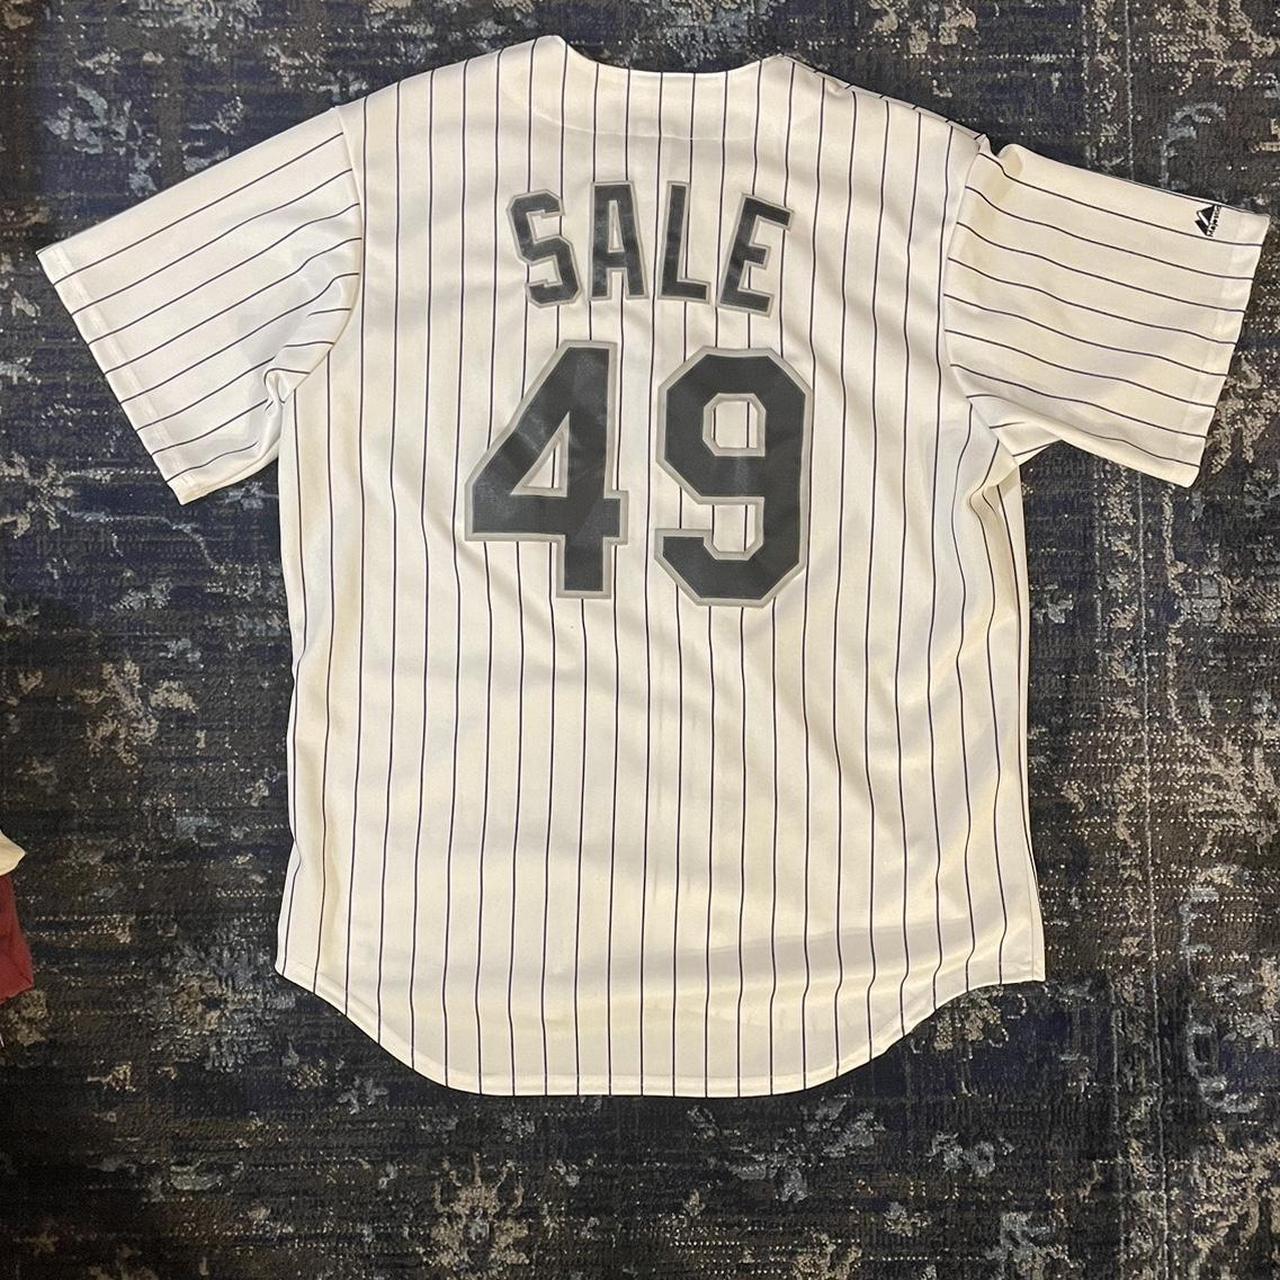 sale #48 chicago white sox jersey mlb pit to pit x - Depop